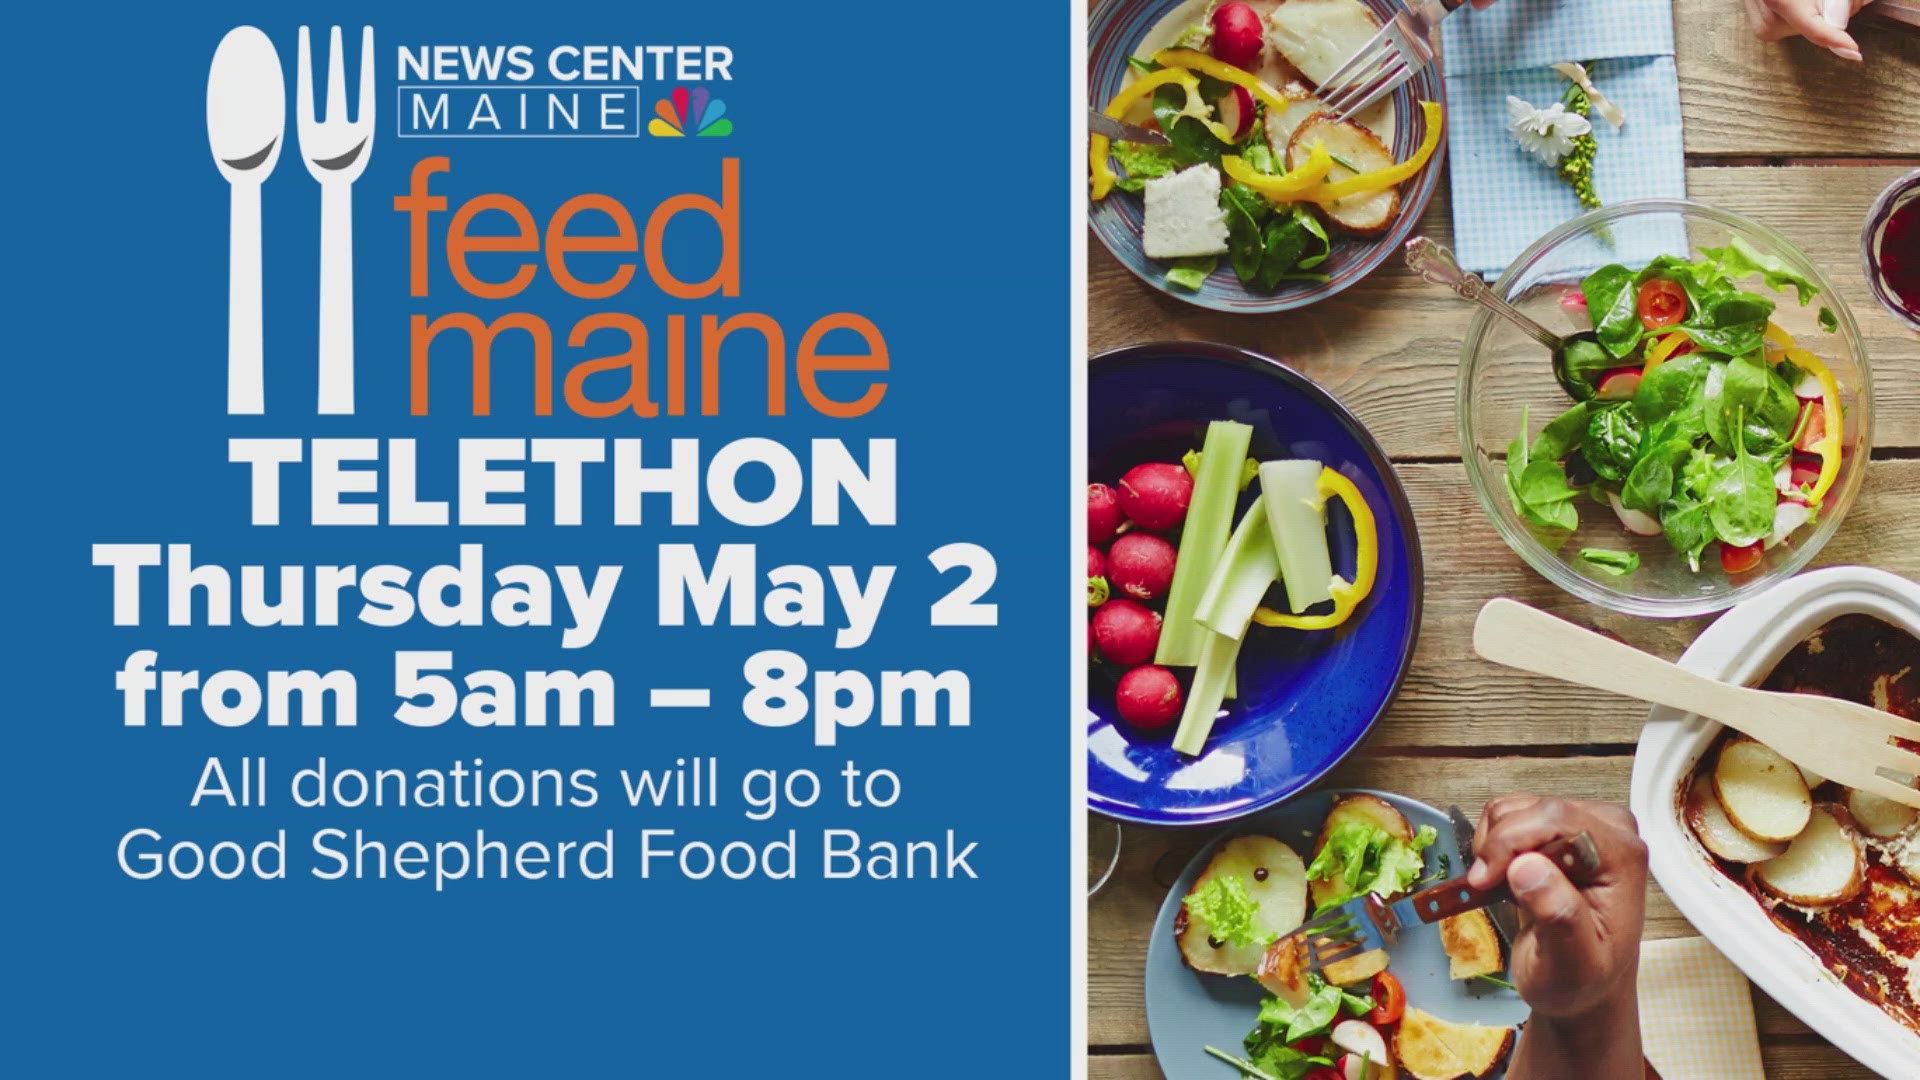 NEWS CENTER Maine's Feed Maine telethon is coming up Thursday. We're partnering with Good Shepherd Food Bank, which works with food pantries across the state.